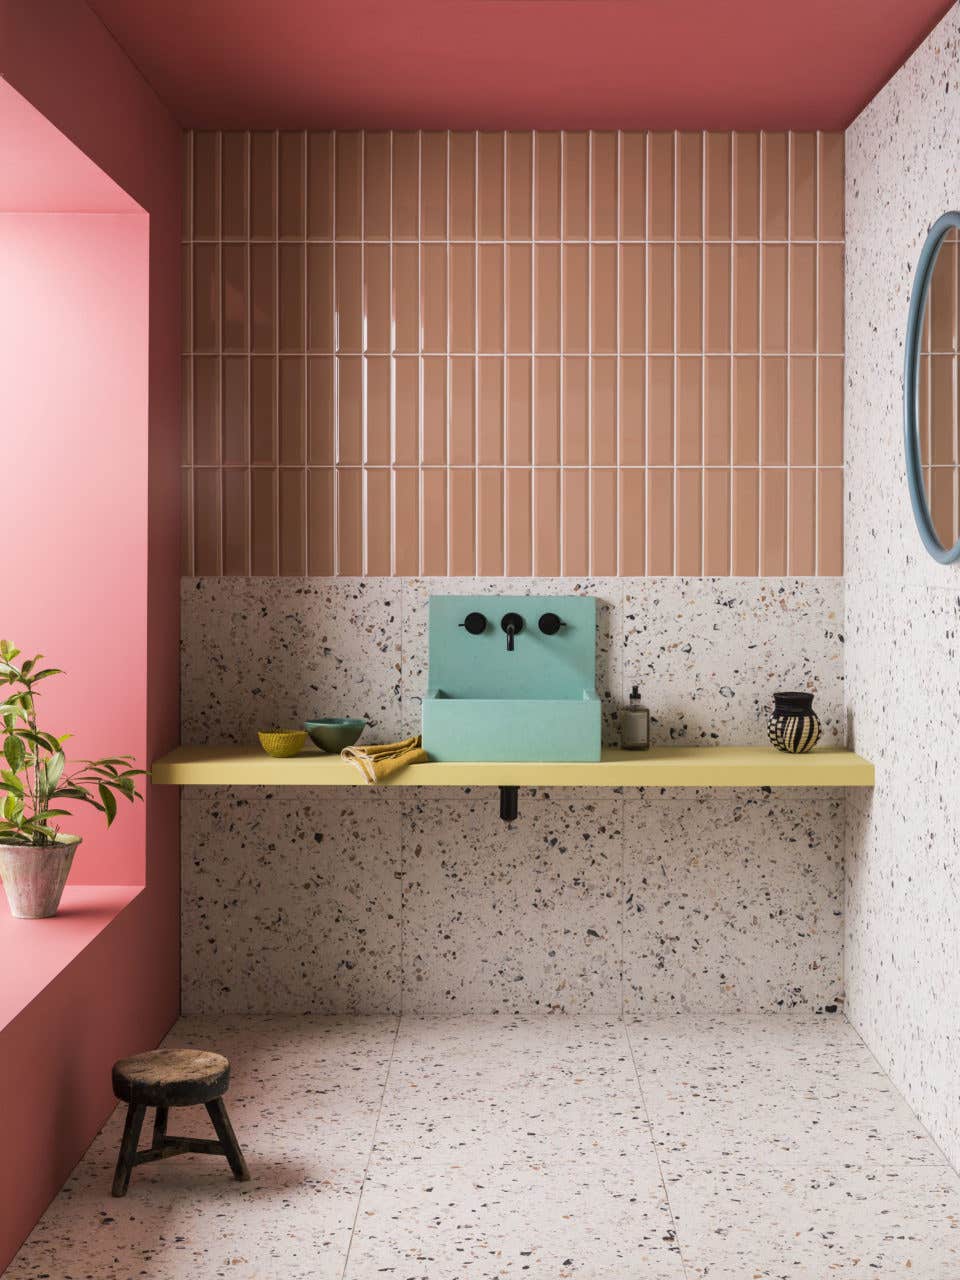 These 9 Bold Spaces Will Make You Want a Colorful Sink